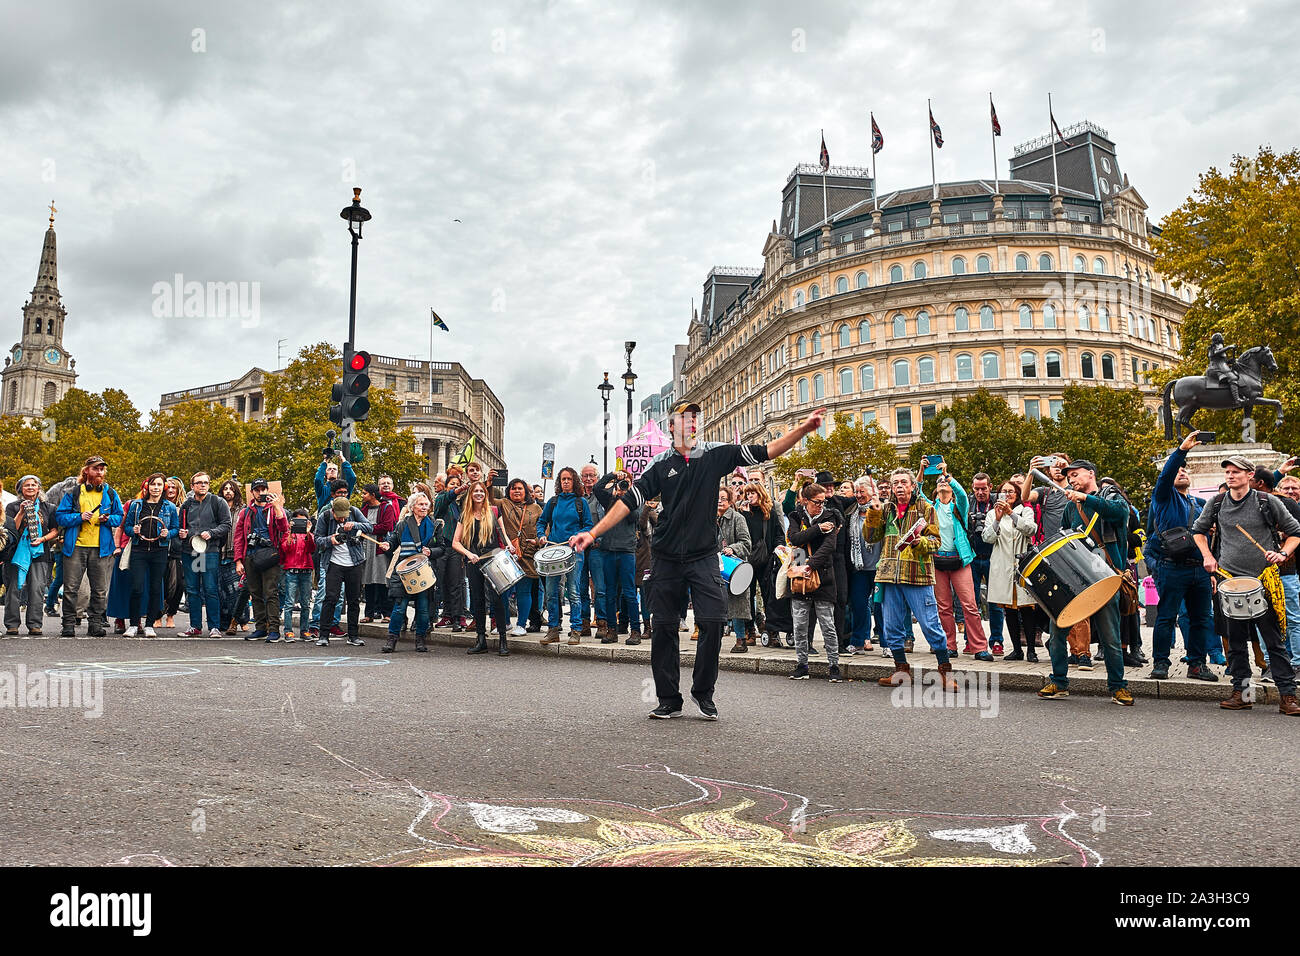 London, U.K. - Oct 8, 2019: A man leads drummers in an impromptu display on the second day of an occupation of Trafalgar Square by campaigners from Extinction Rebellion. Stock Photo